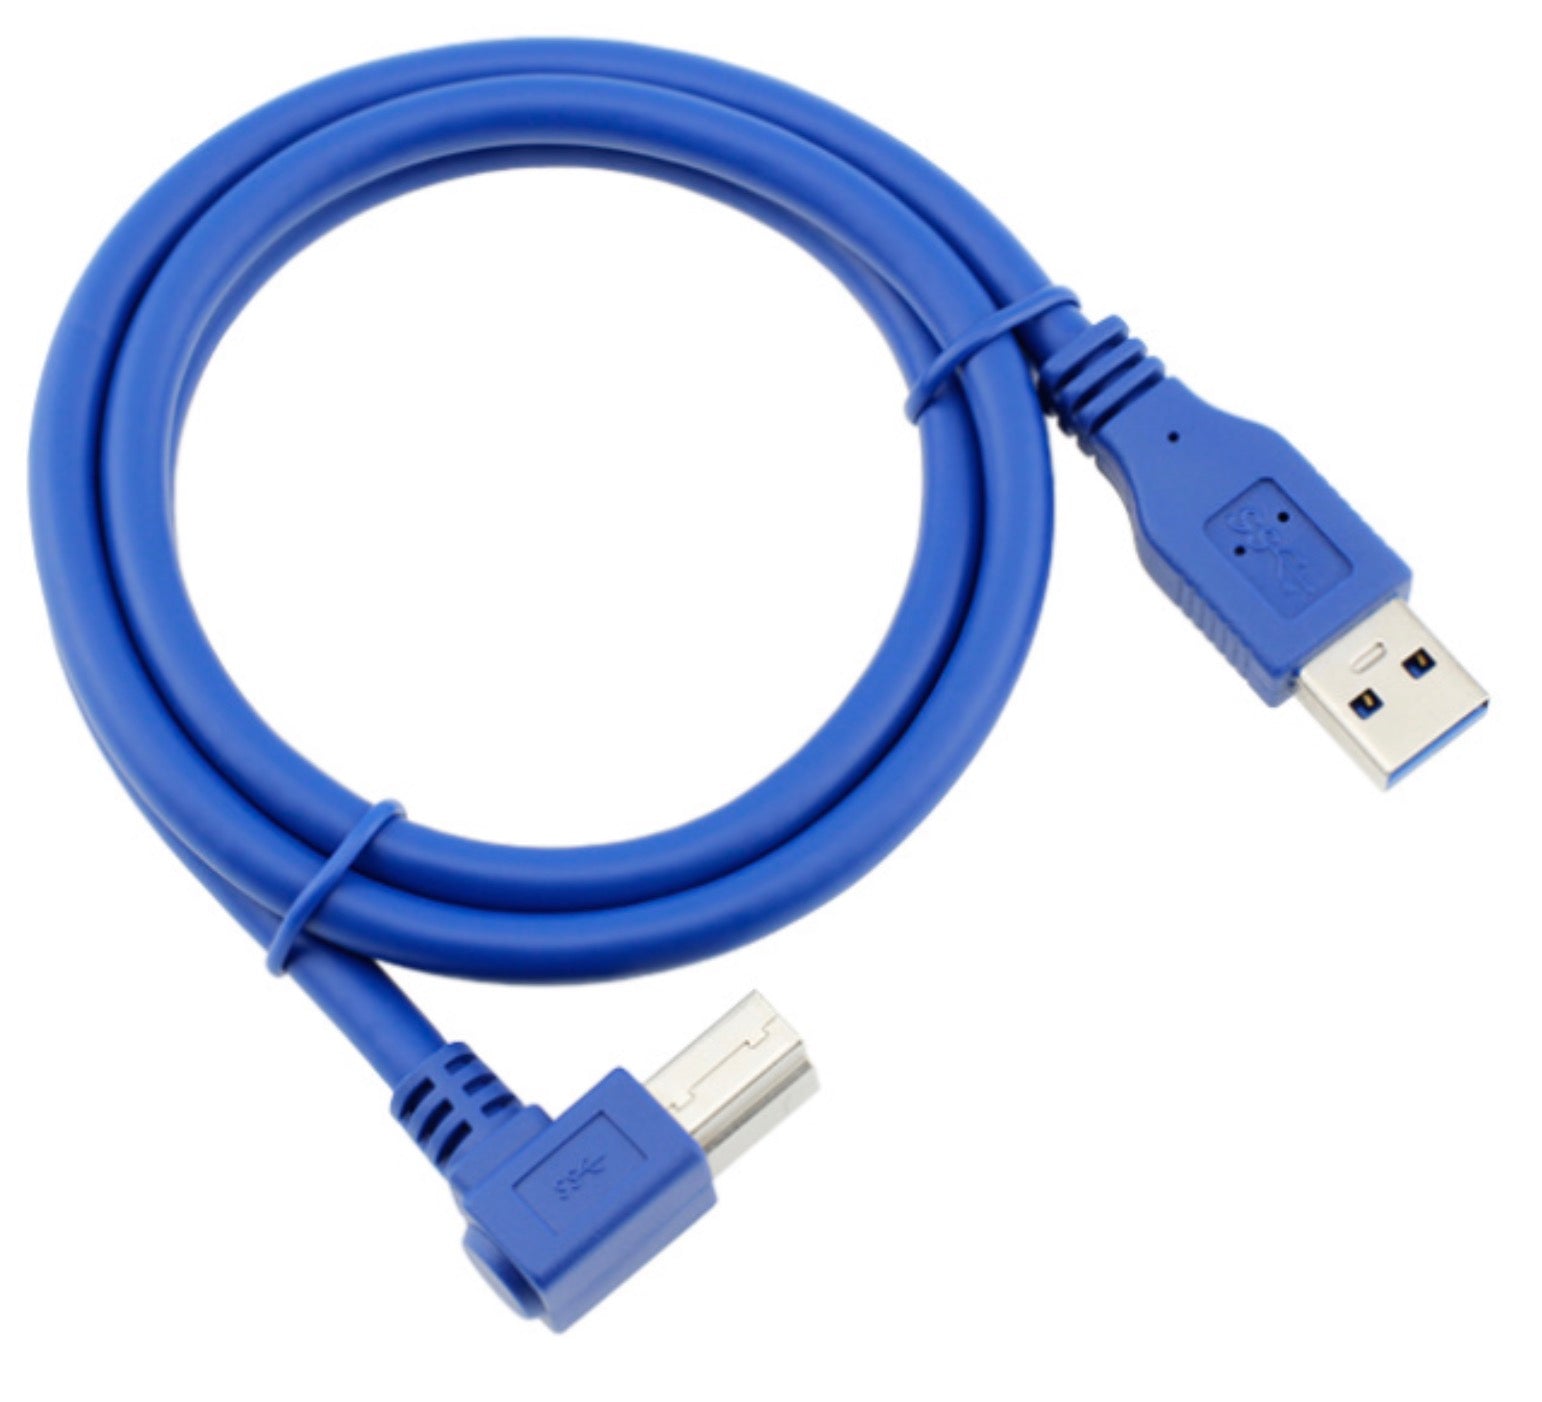 USB-A 3.0 Male to USB Type B Male Printer Cable (Right Angle) 0.6m